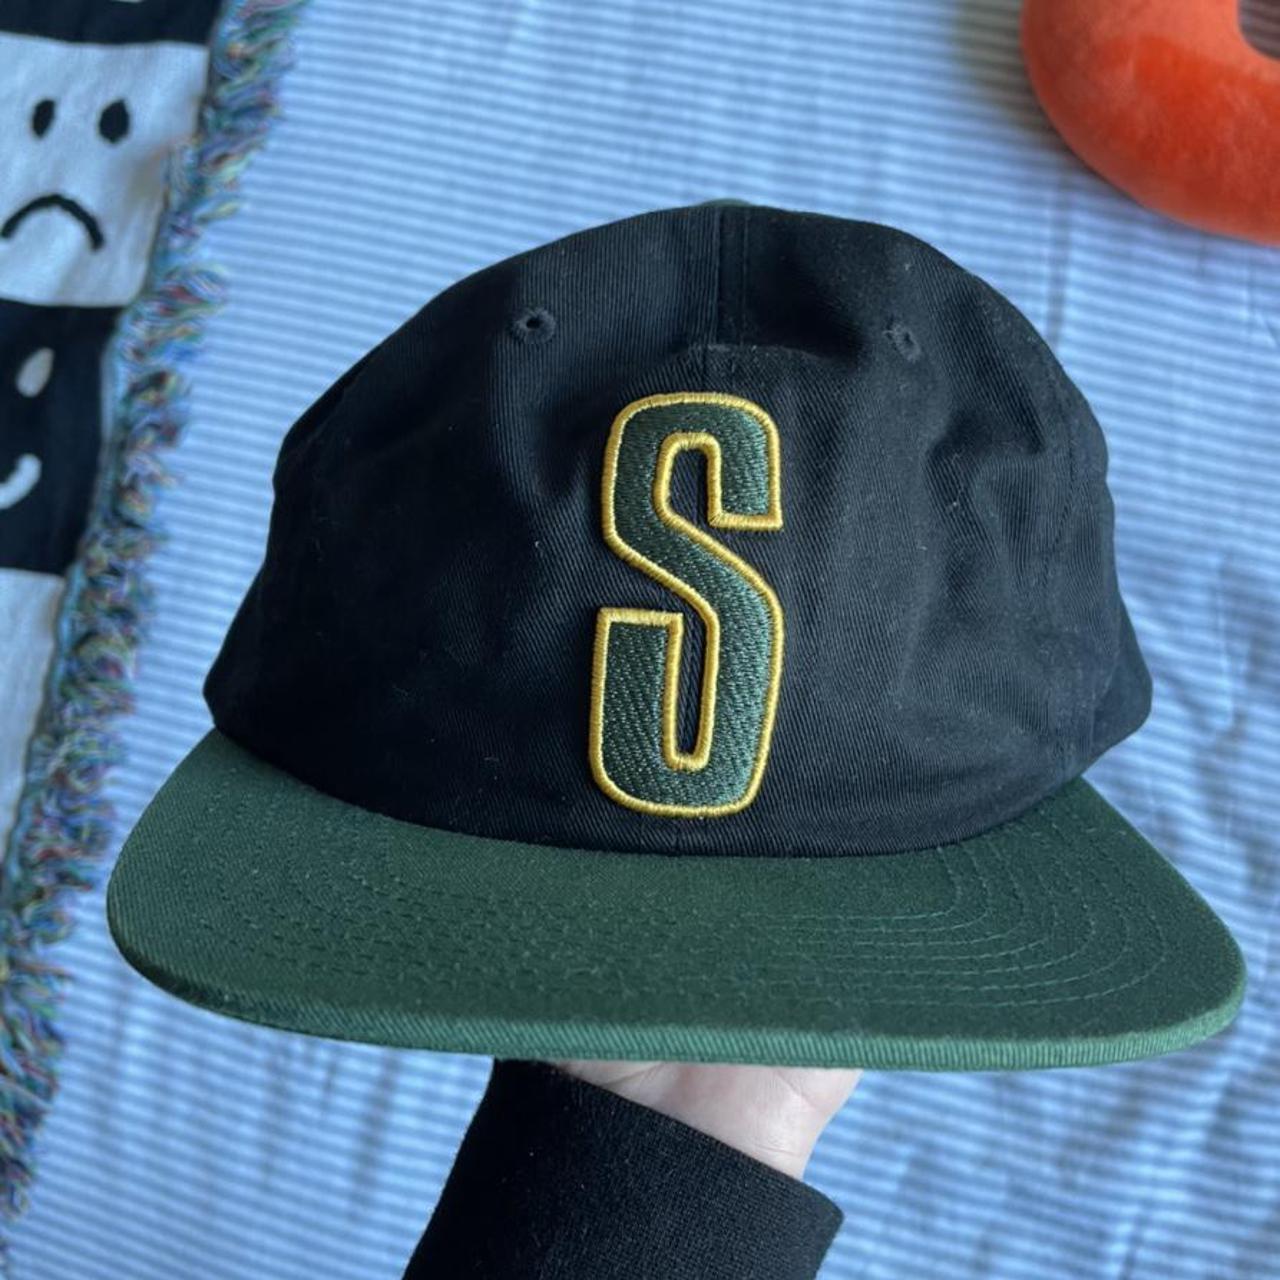 Product Image 1 - Stussy two toned hat. Never